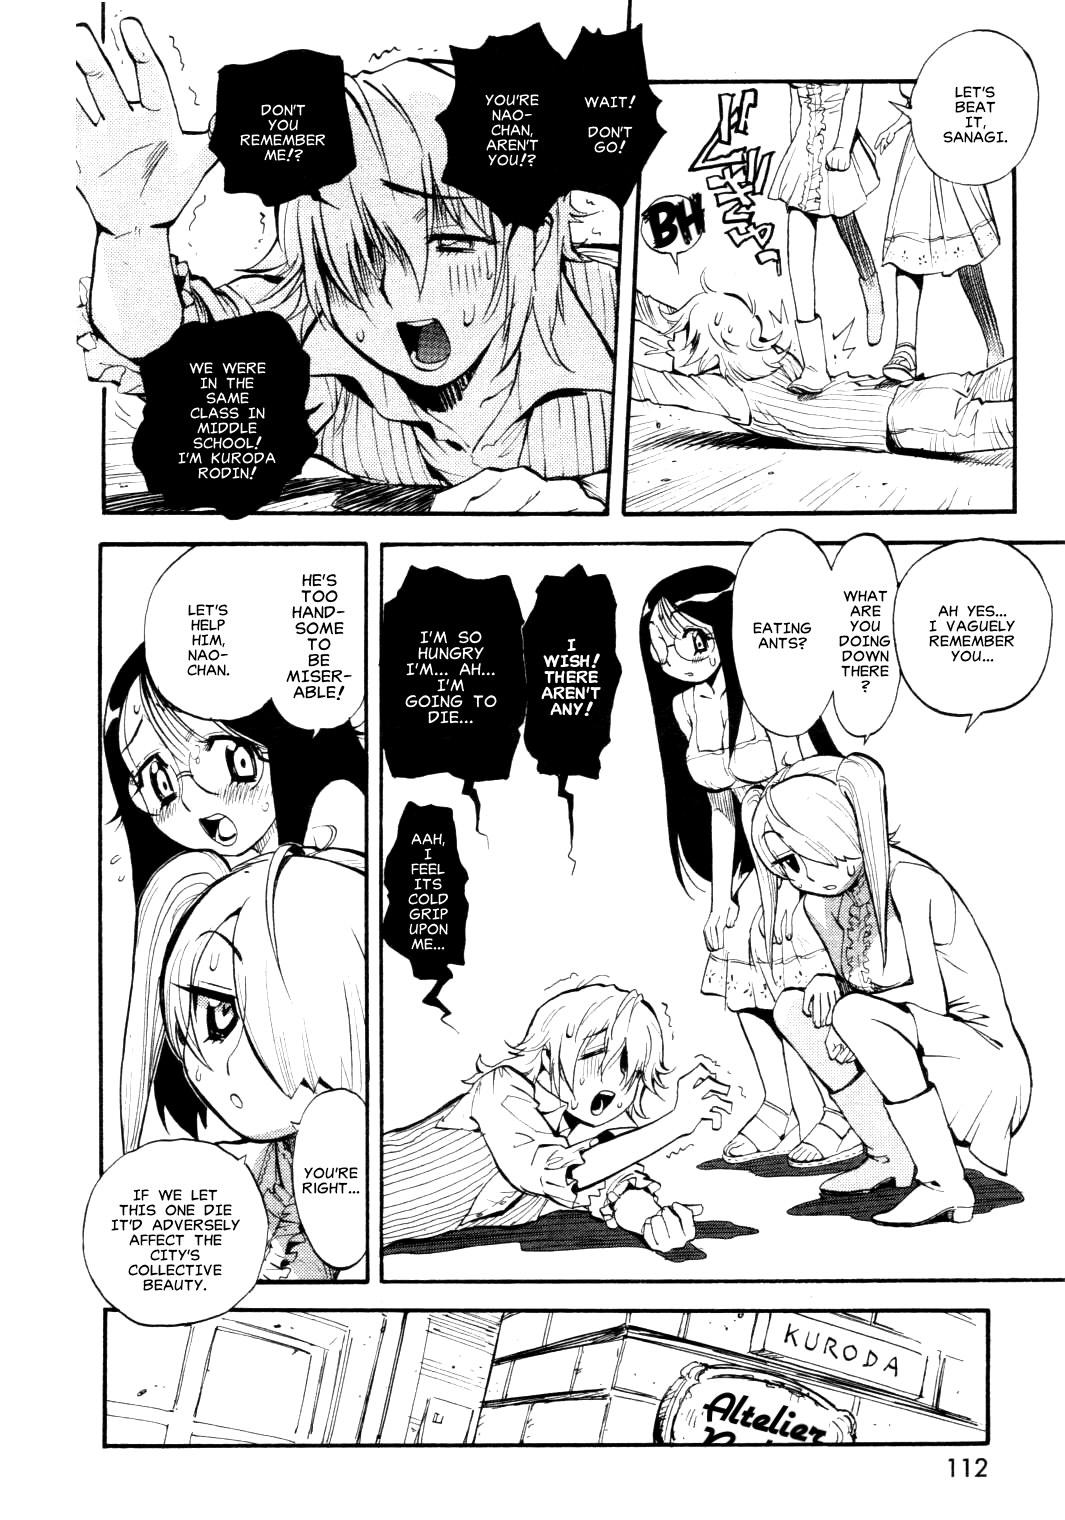 Best Blow Job That Capricious Nao Episode 2 Gordinha - Page 2